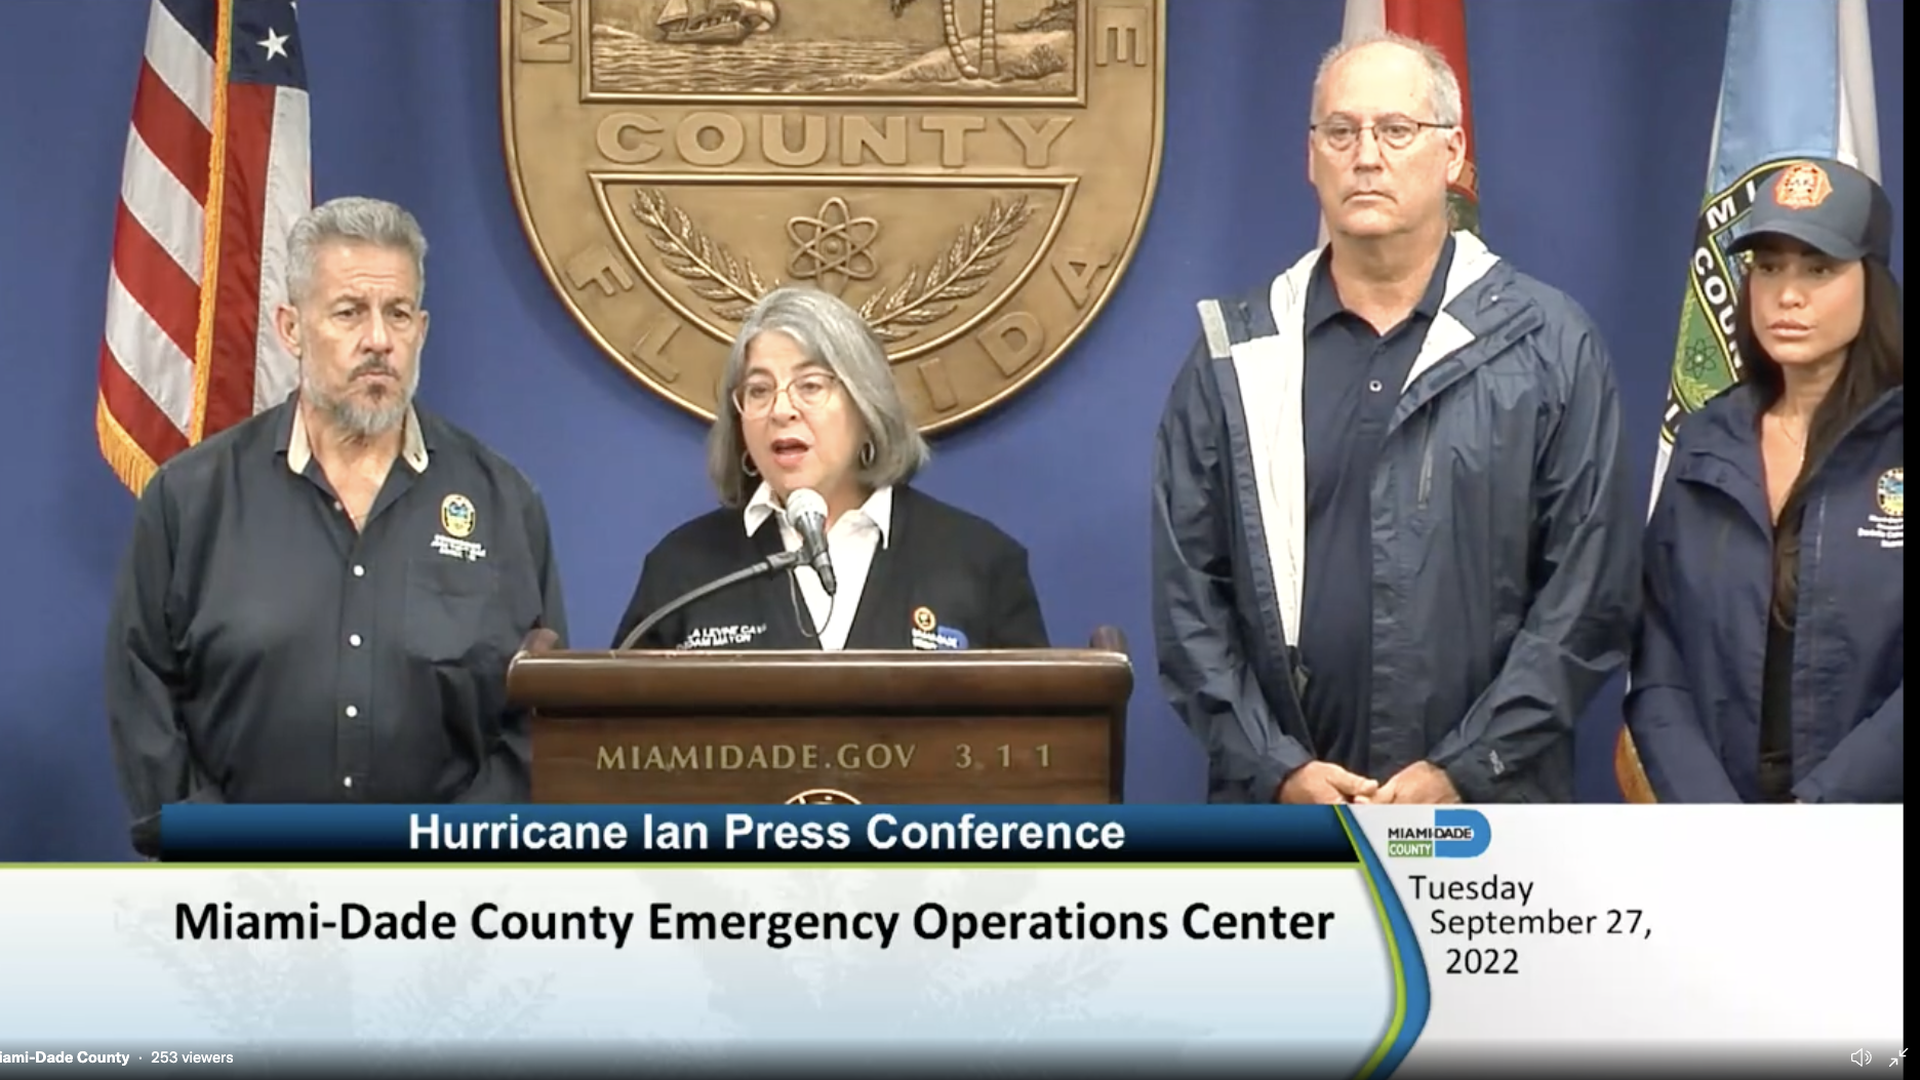 Miami-Dade County officials stand at a lectern for a press conference.